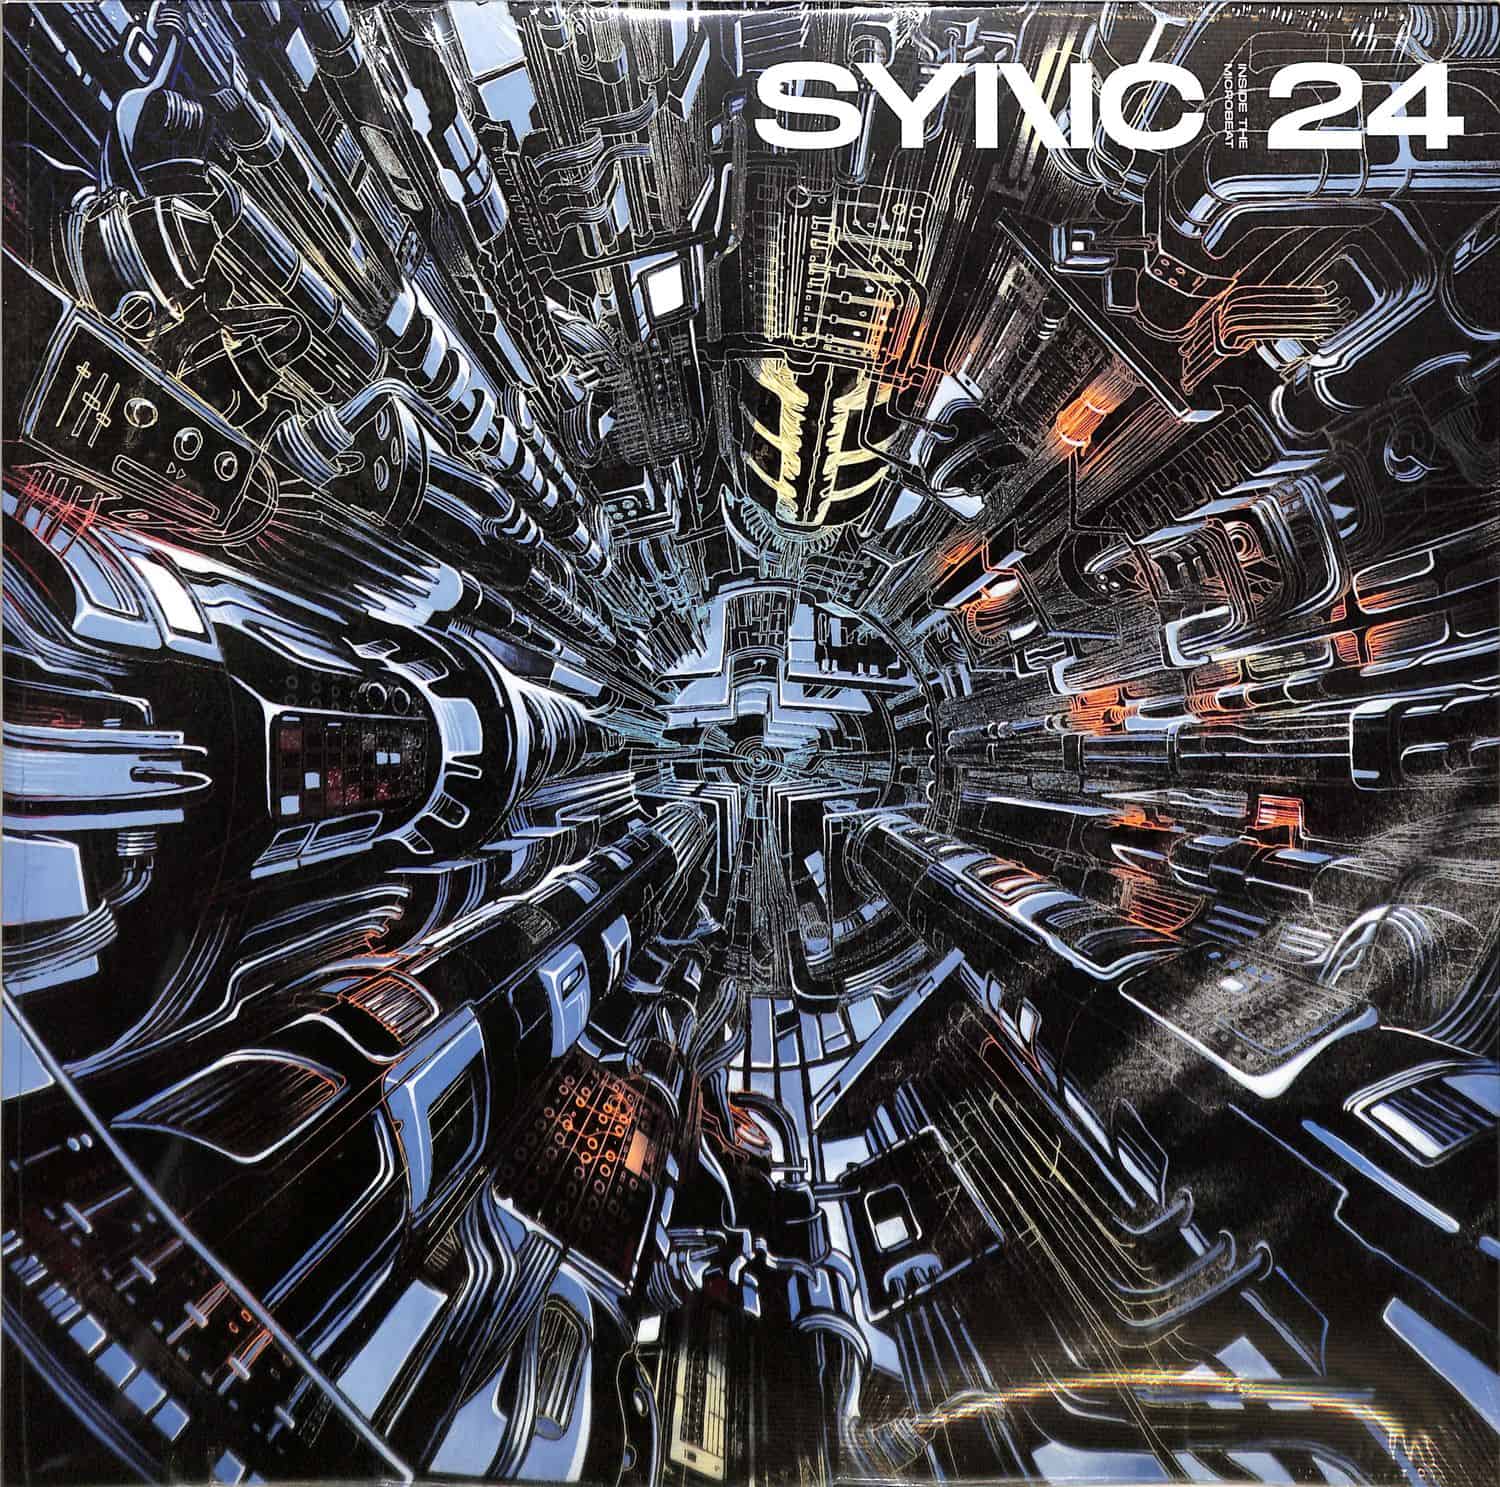 Sync 24 - INSIDE THE MICROBEAT 